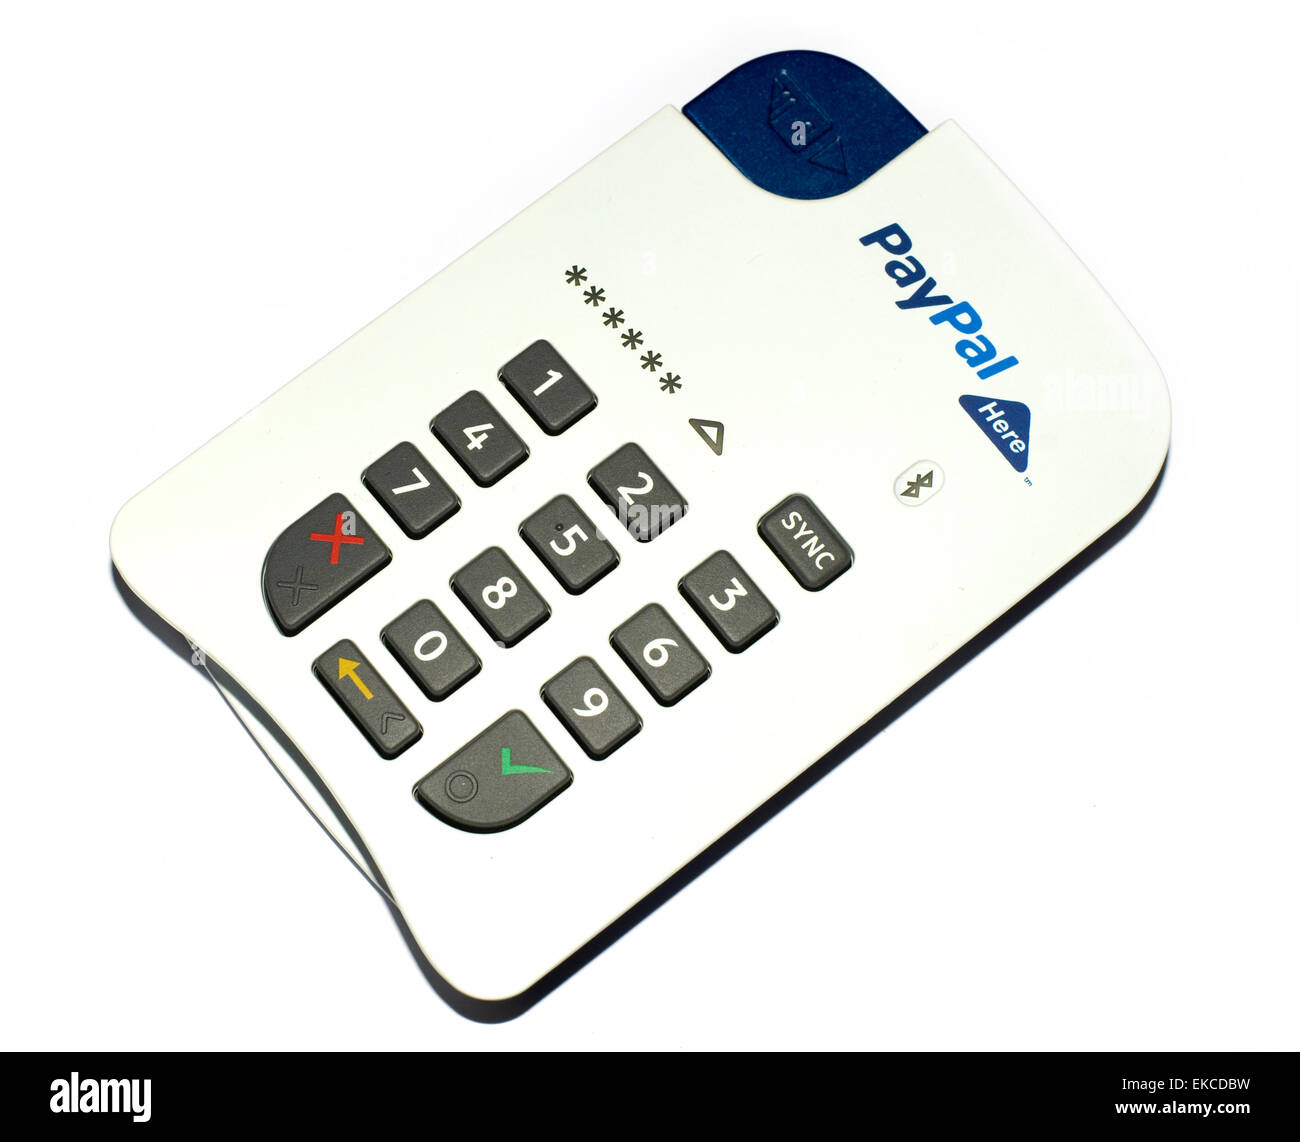 PayPal Here mobile bluetooth card reader on white background. Allows credit card payments to be taken with a mobile phone. Stock Photo